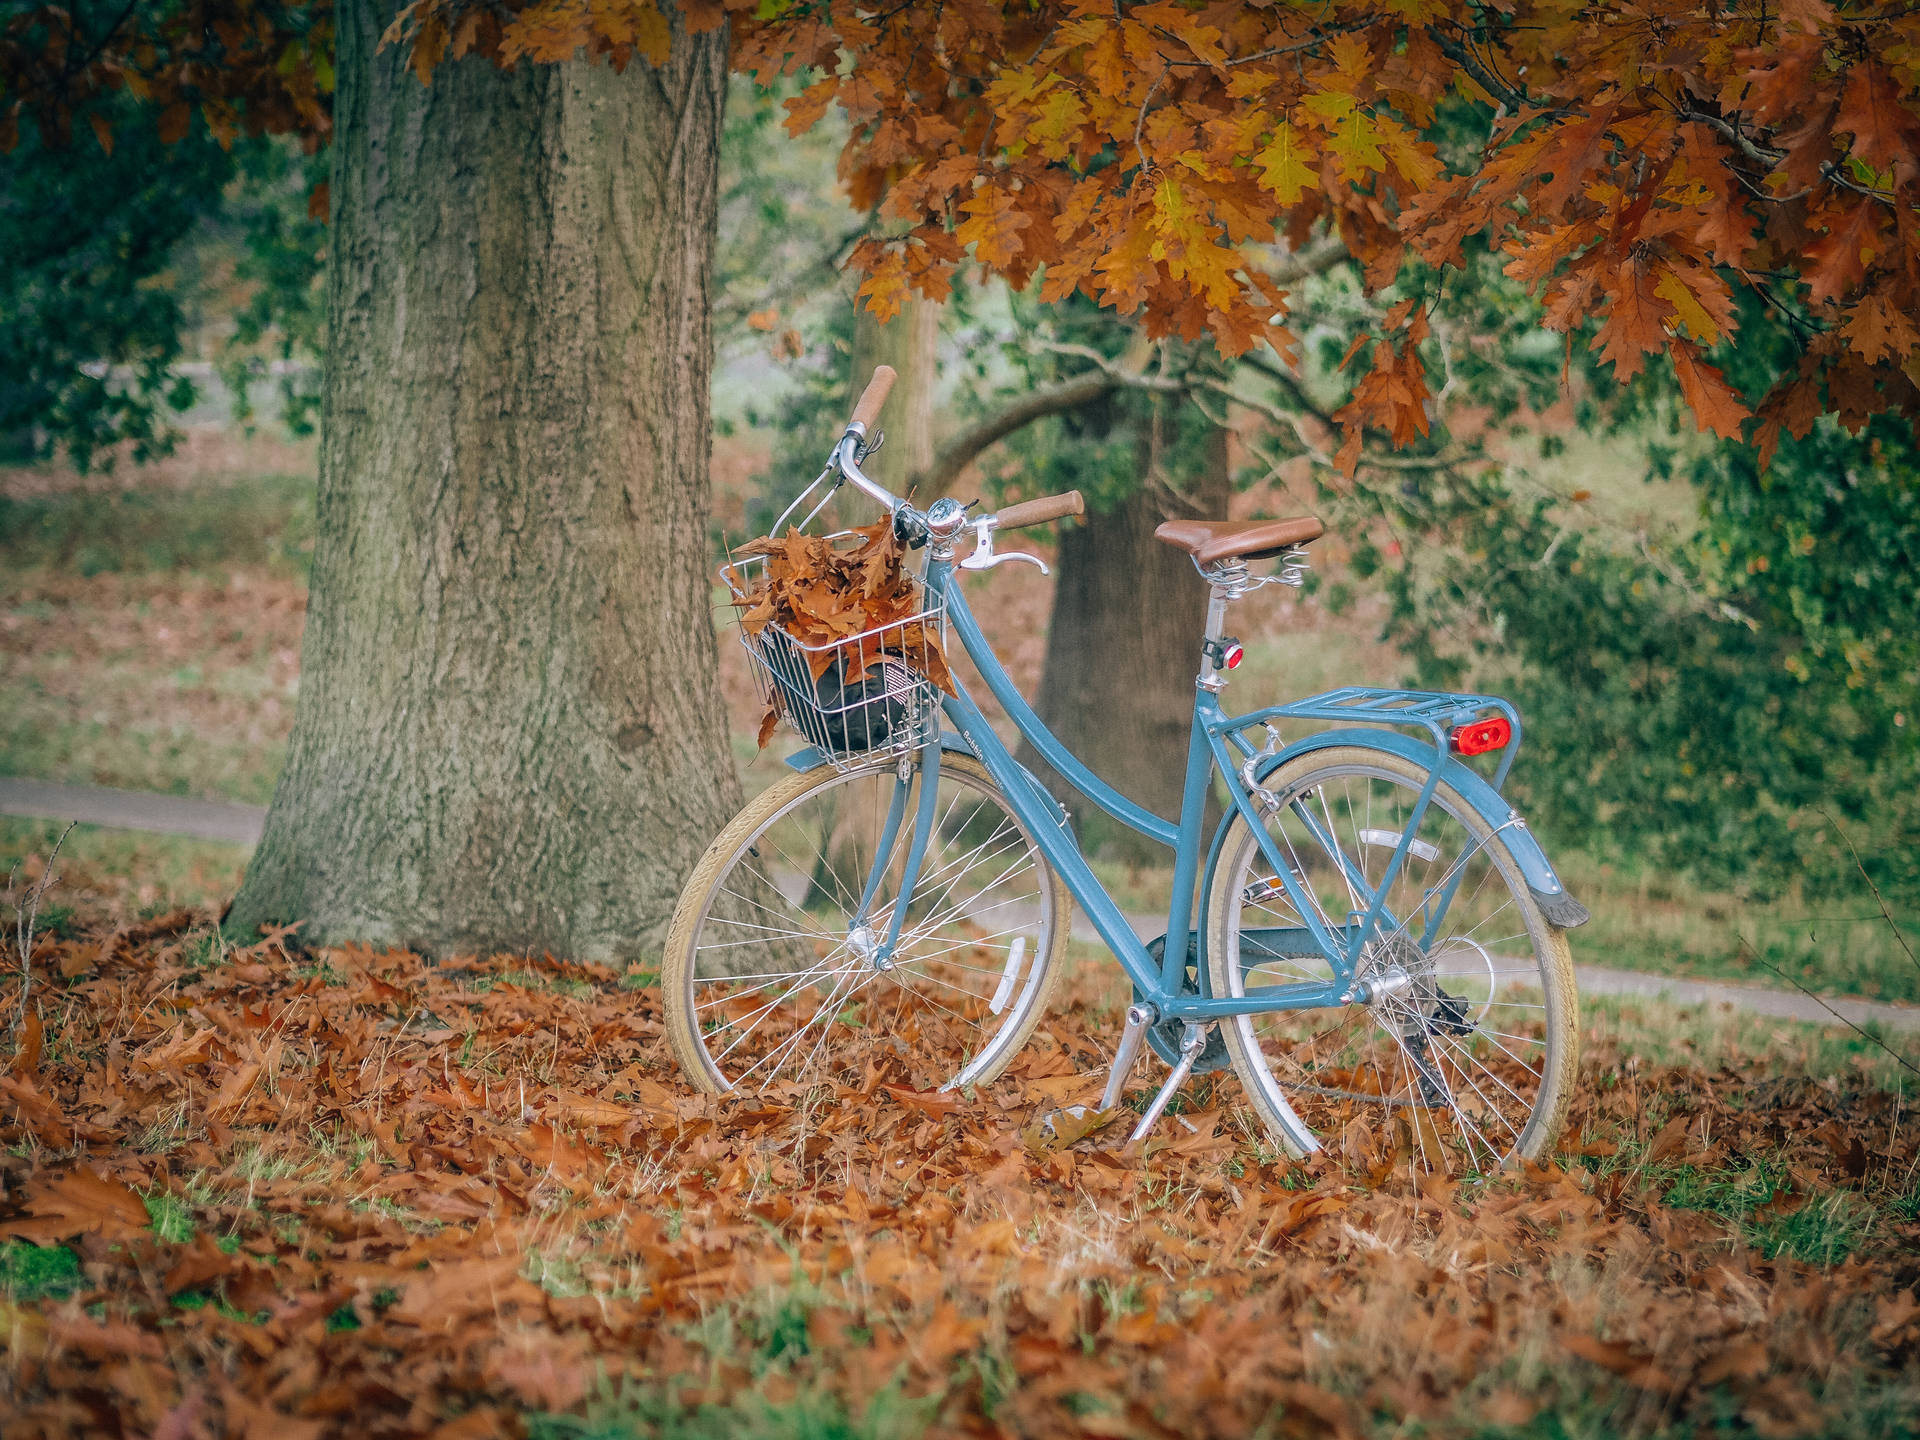 Capturing The Beauty Of The City On A Bike In The Autumn Season. Background